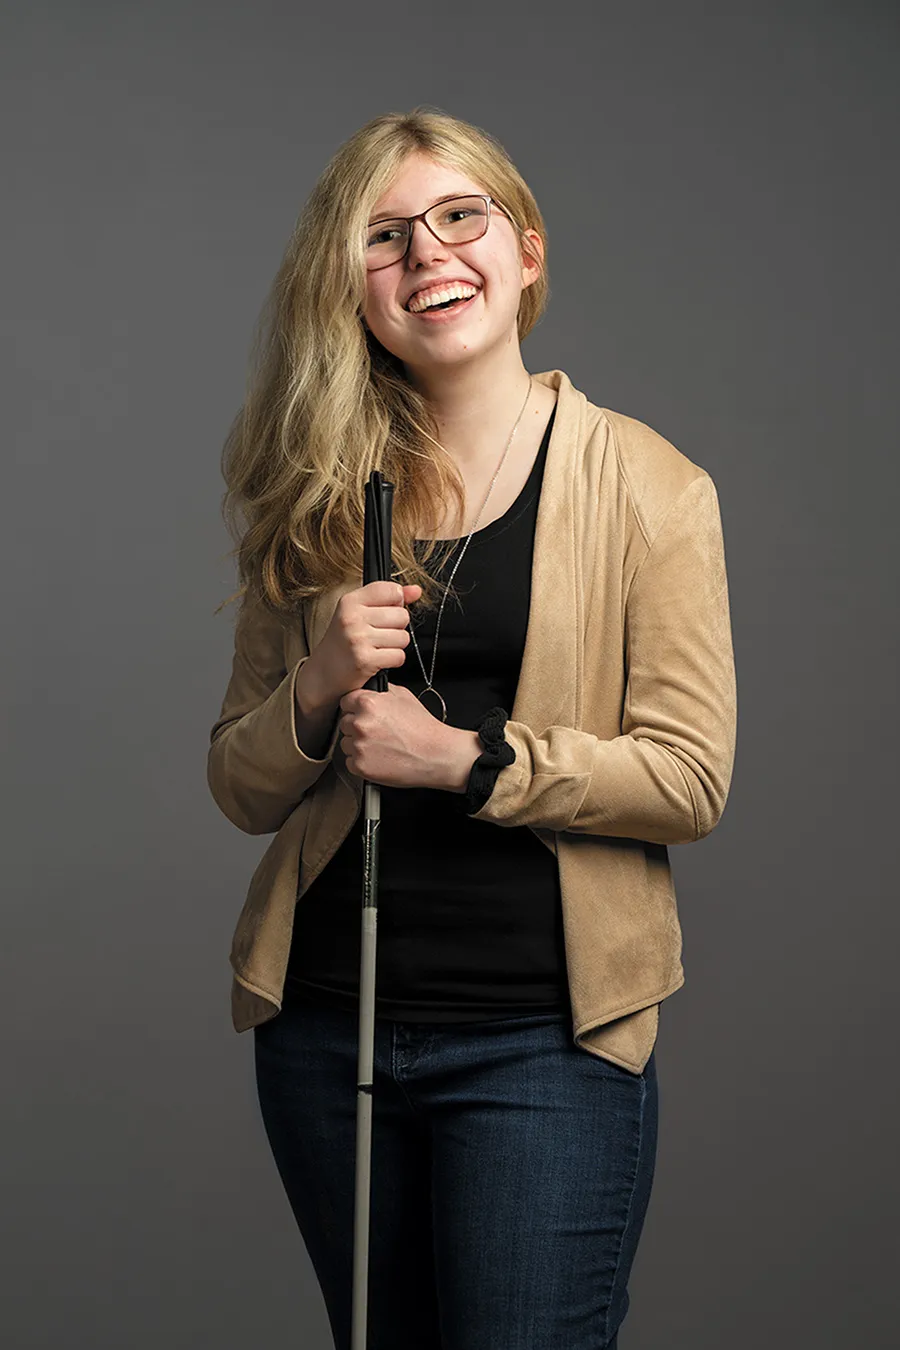 kaleigh with long blonde hair smiling wearing a tan blazer and dark pants holding her white cane